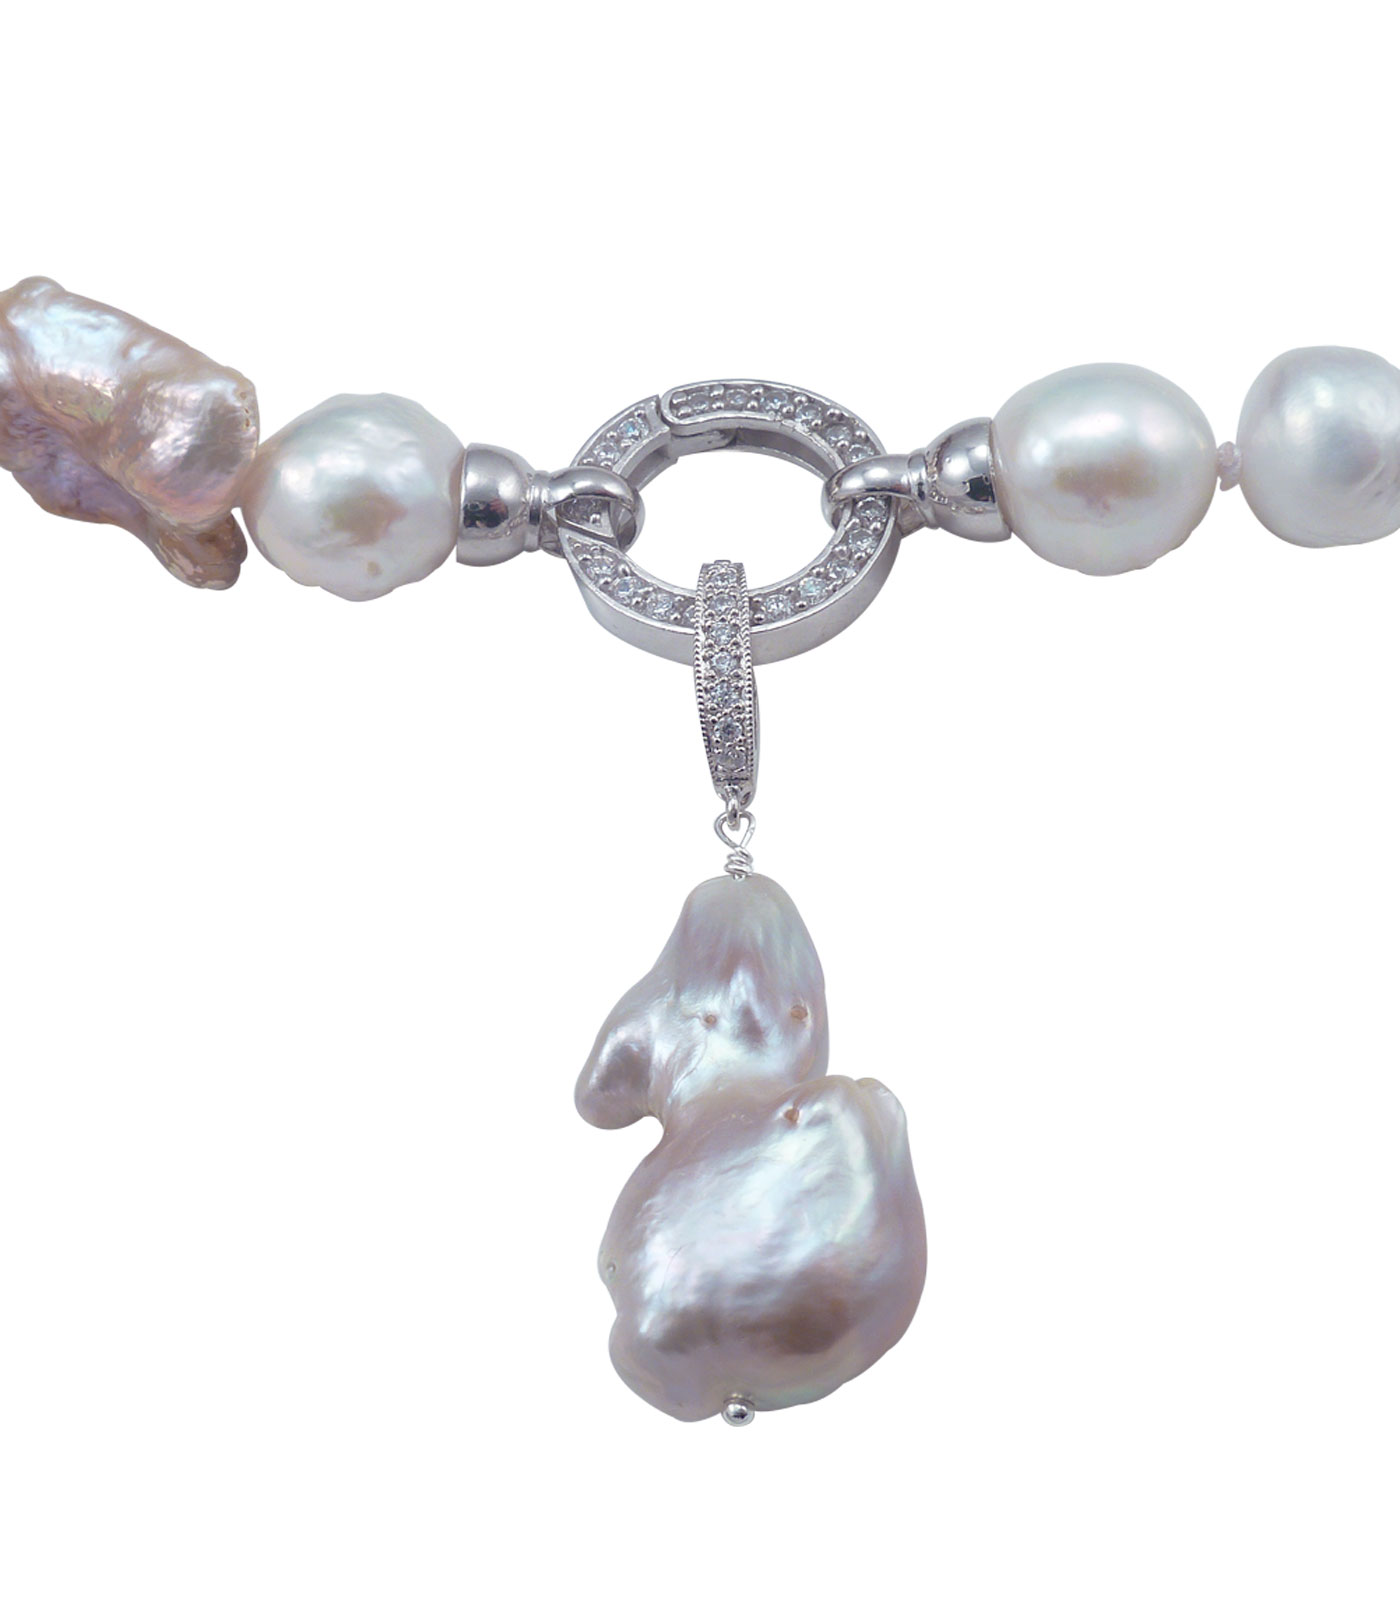 Pearl necklace white bronze pearls. Stunning modern pearl jewelry